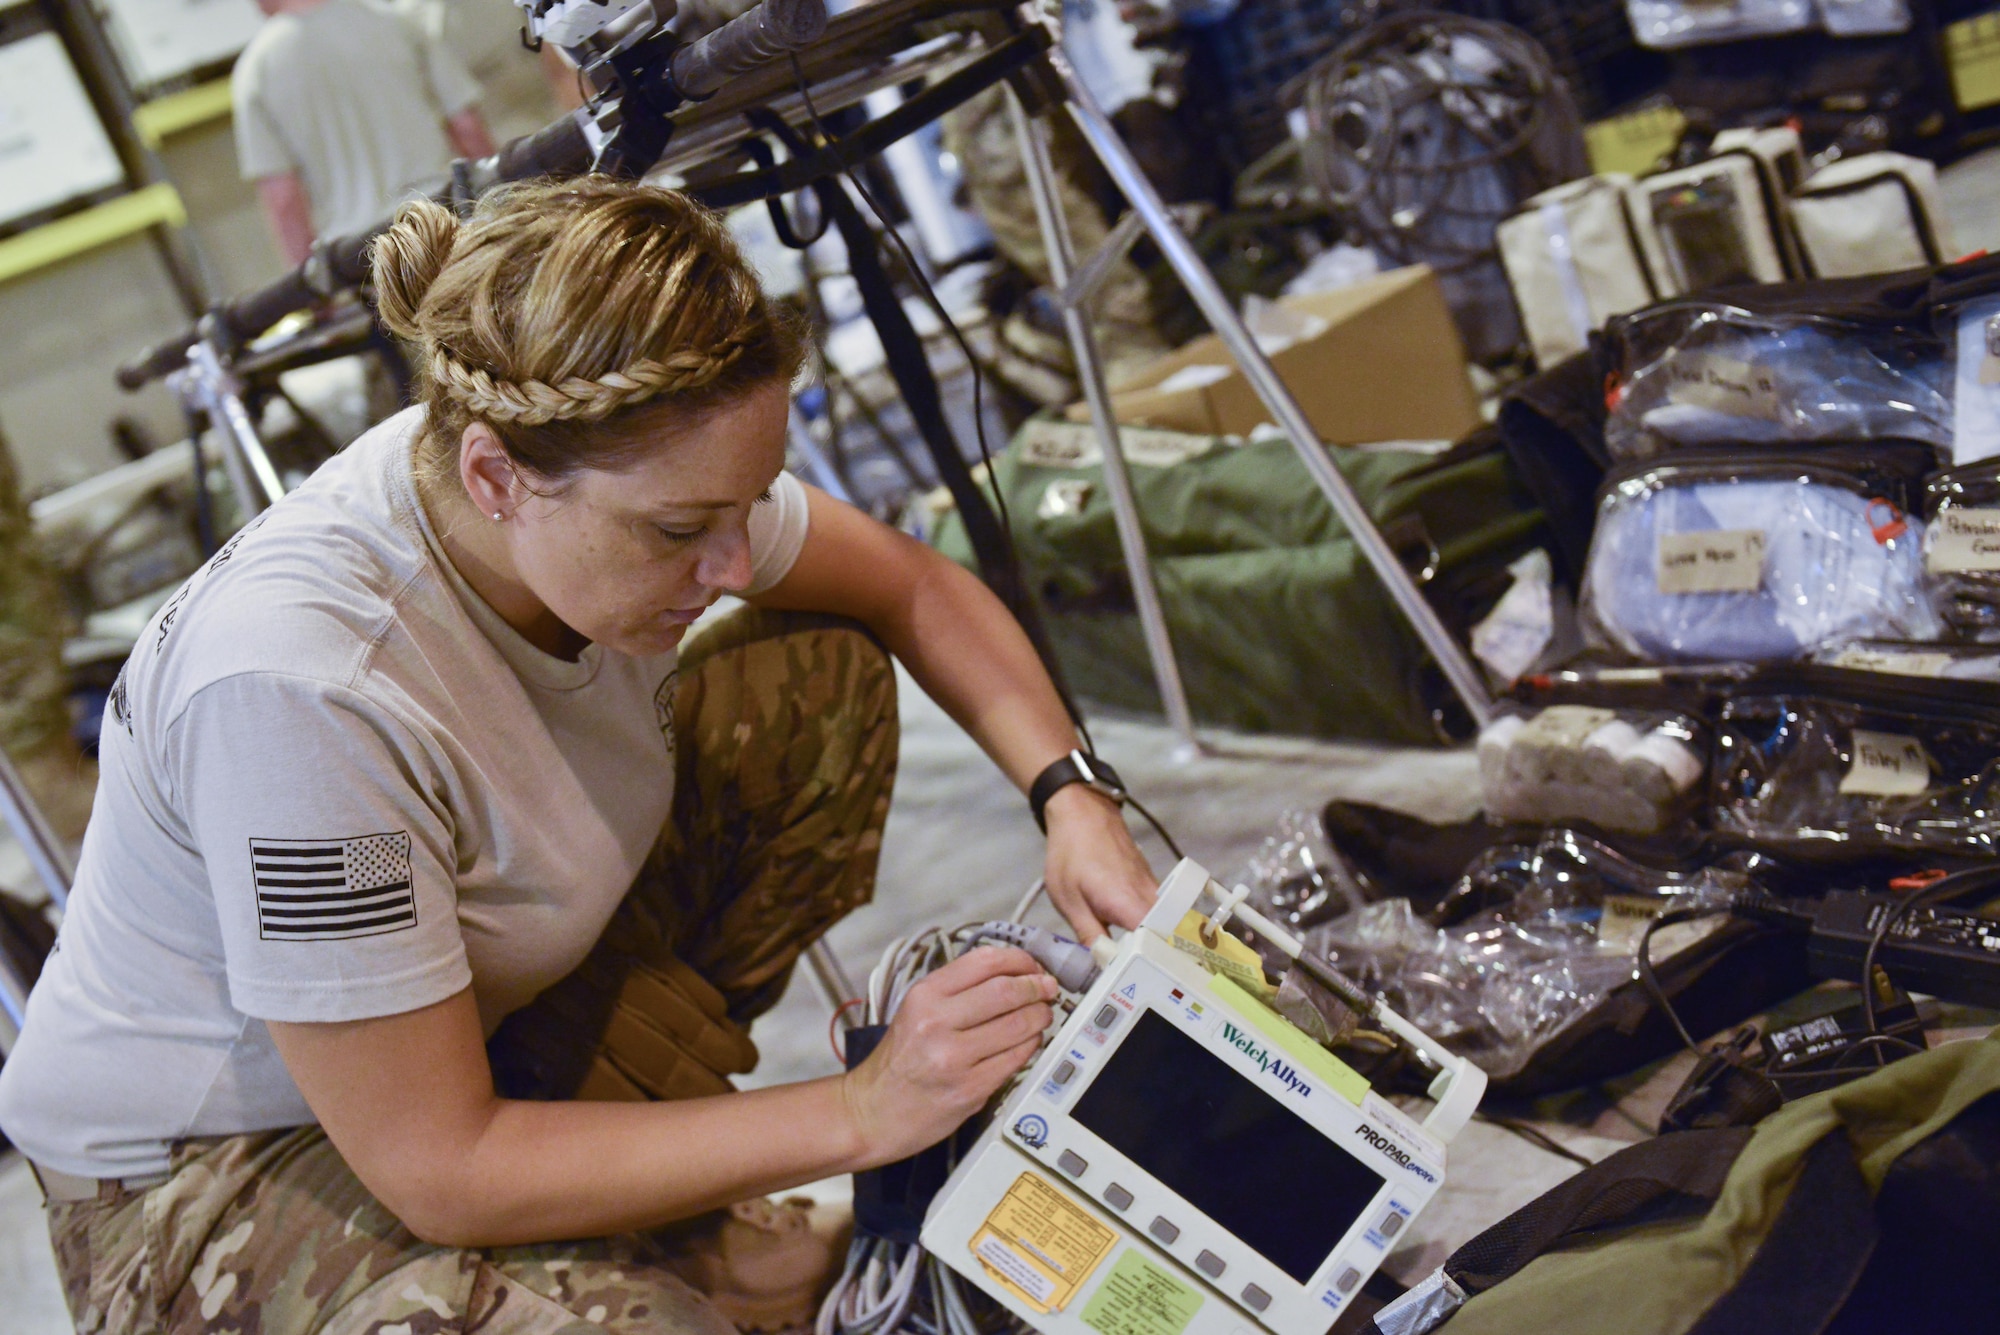 Capt. Suzanne Bohn, 379th Expeditionary Medical Group Mobile Field Surgical Team, completes a function check on a heart monitor in the intensive care section of the mobile hospital setup during a timed set up and equipment familiarization training August 28, 2015 at Al Udeid Air Base, Qatar. (U.S. Air Force photo/Staff Sgt. Alexandre Montes)